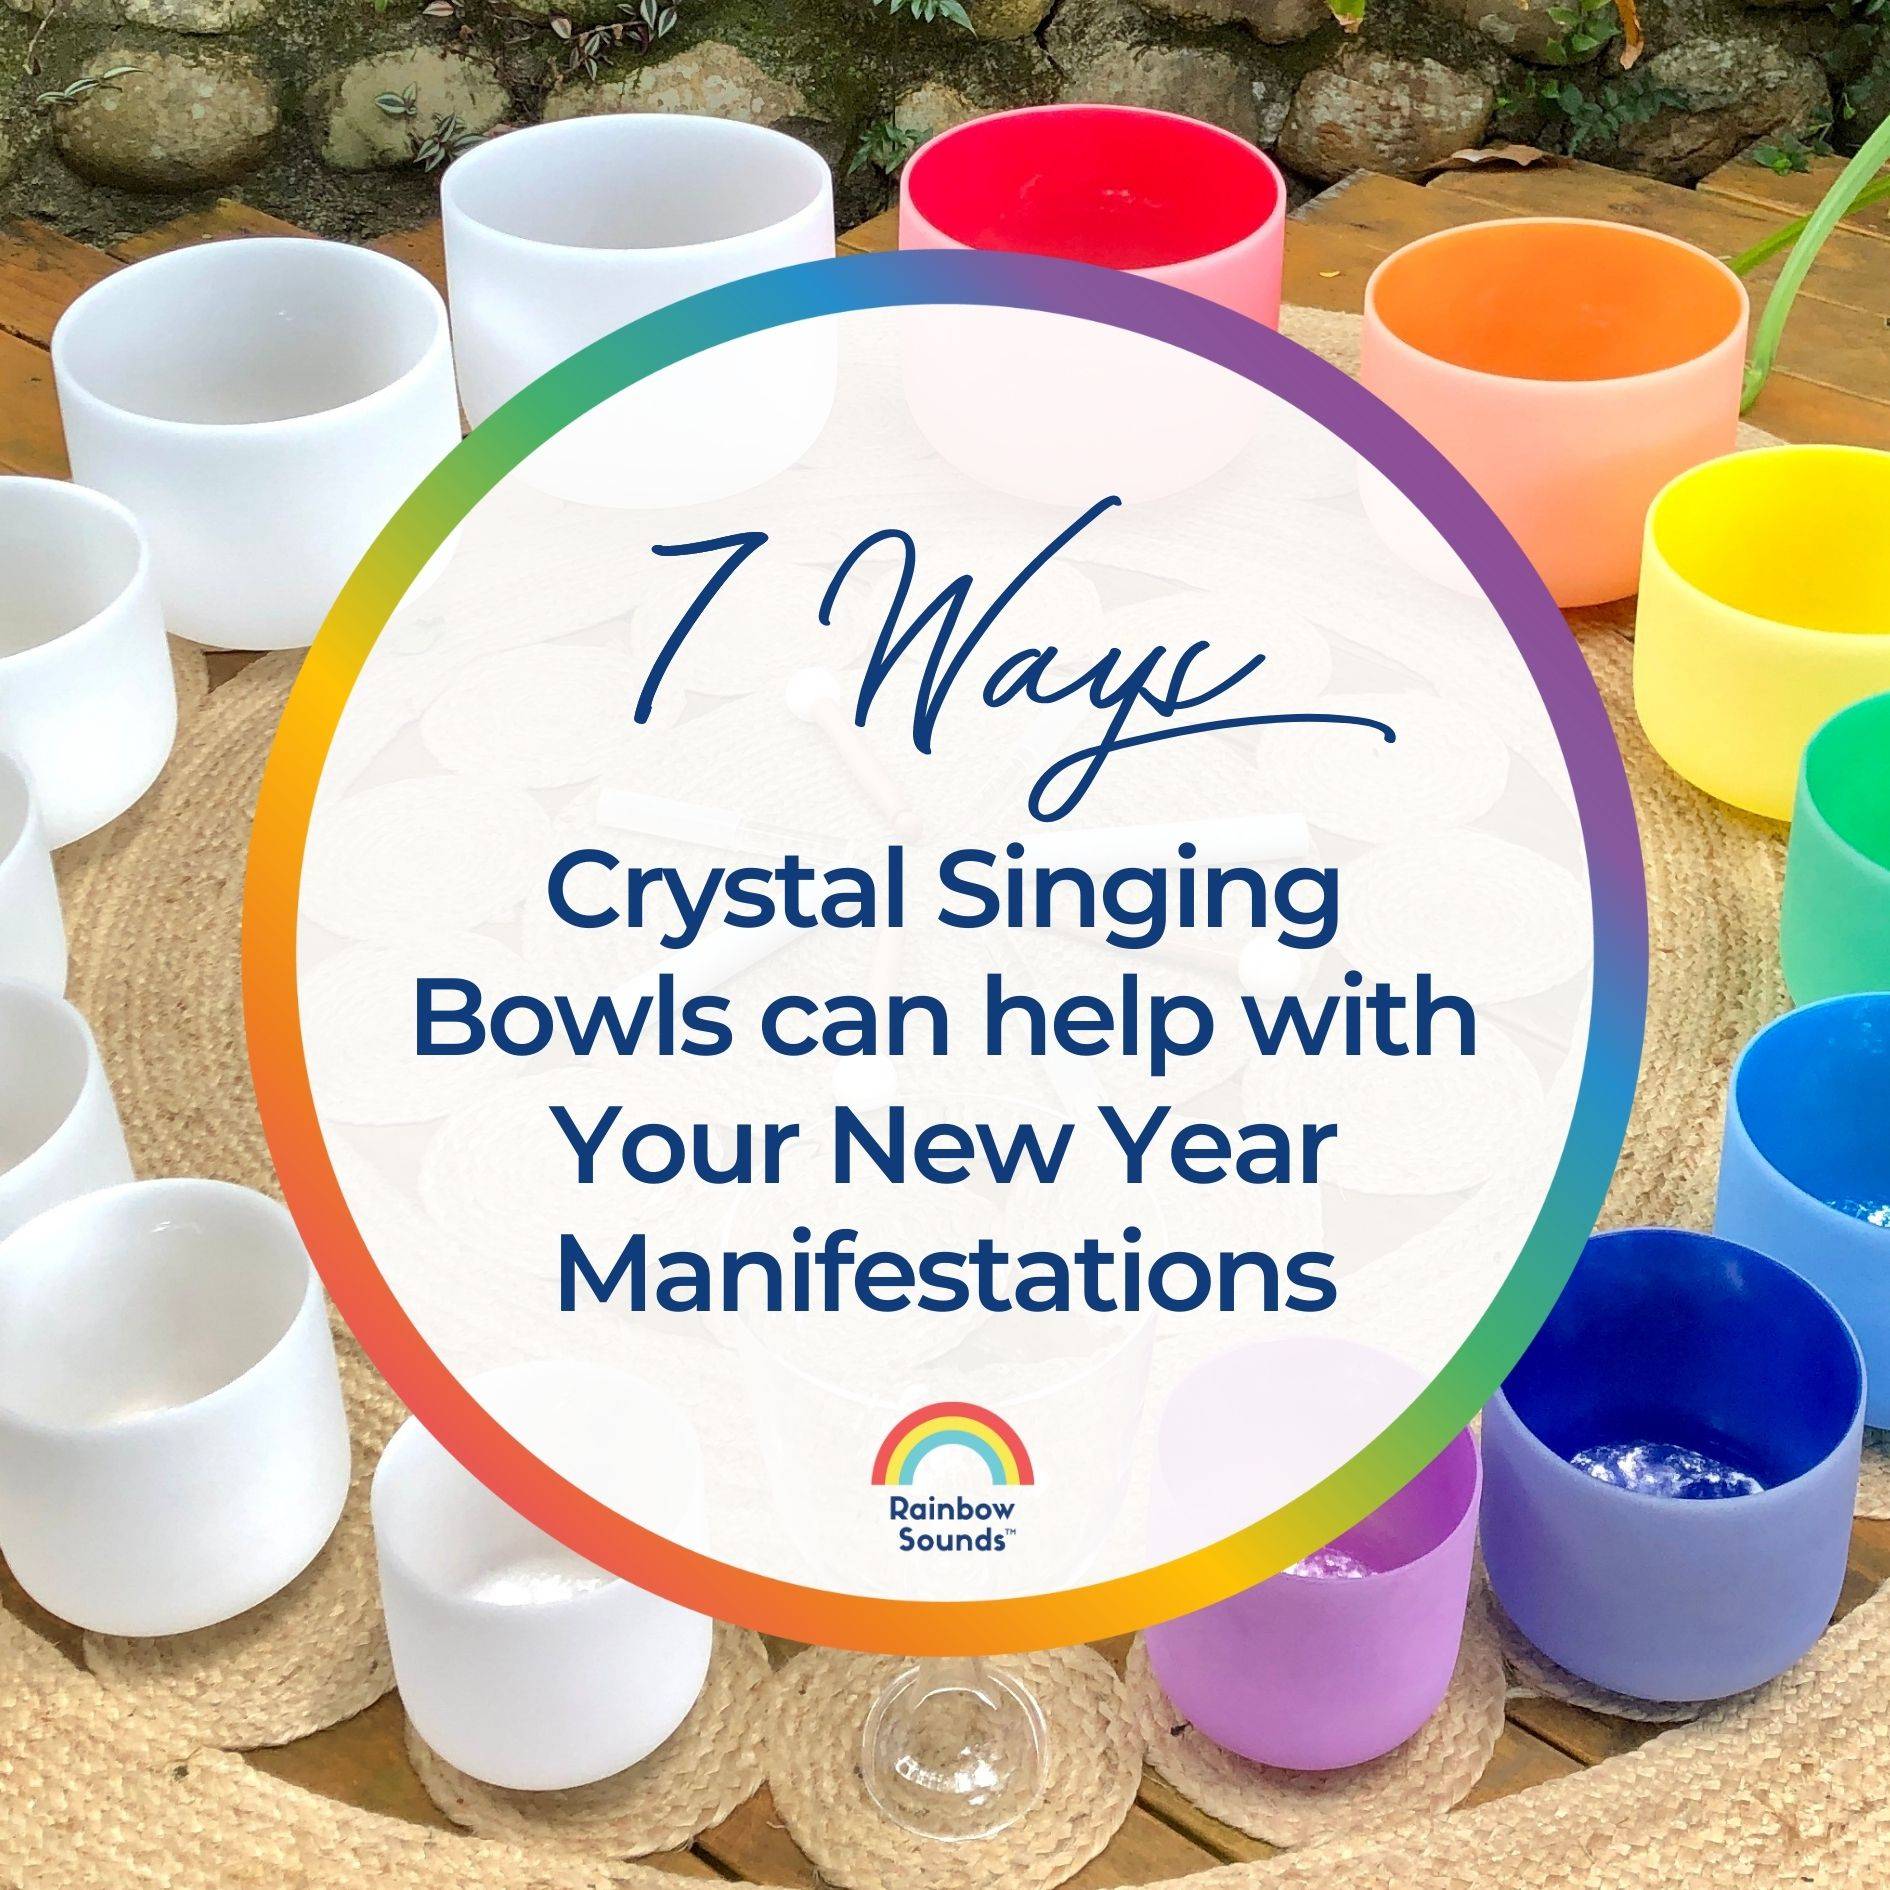 7 Ways Crystal Singing Bowls can help with Your New Year Manifestations